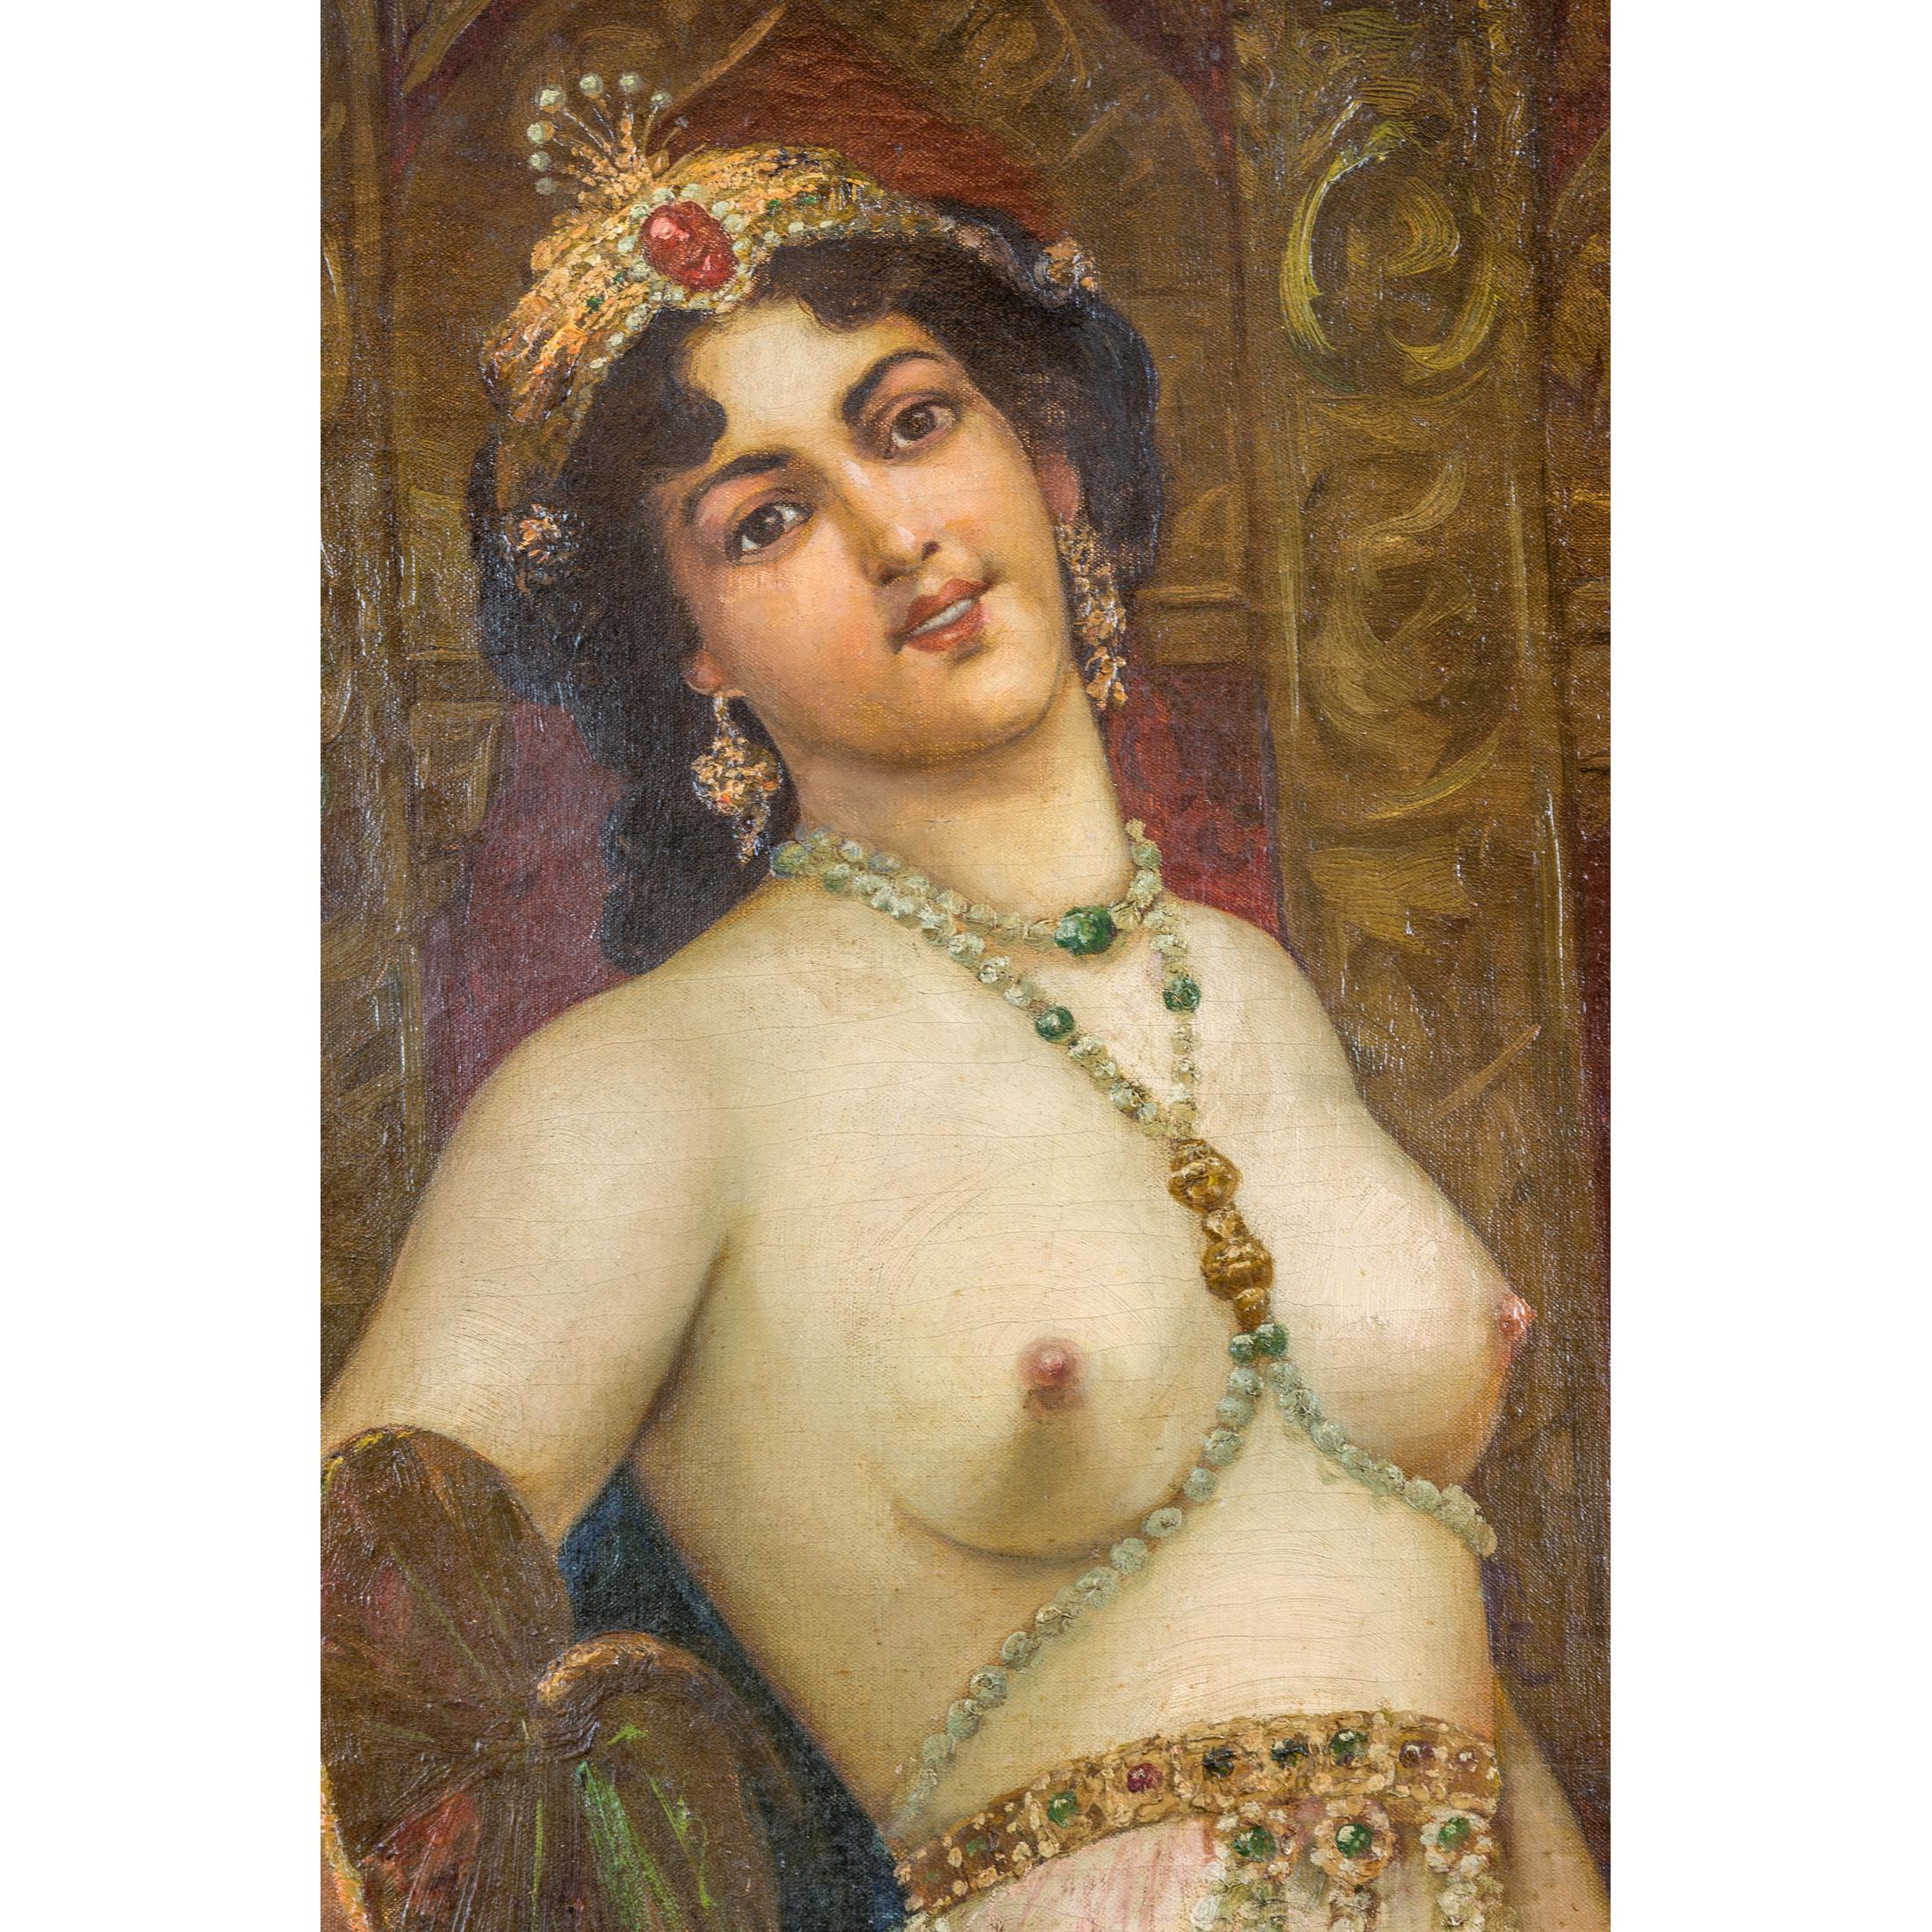 Italian, ca. 19th century

Odalisque 

Signed illegible  

Oil on canvas
51 in. x 21 3/4 inches
Framed: 61 1/2 x 32 1/4 inches